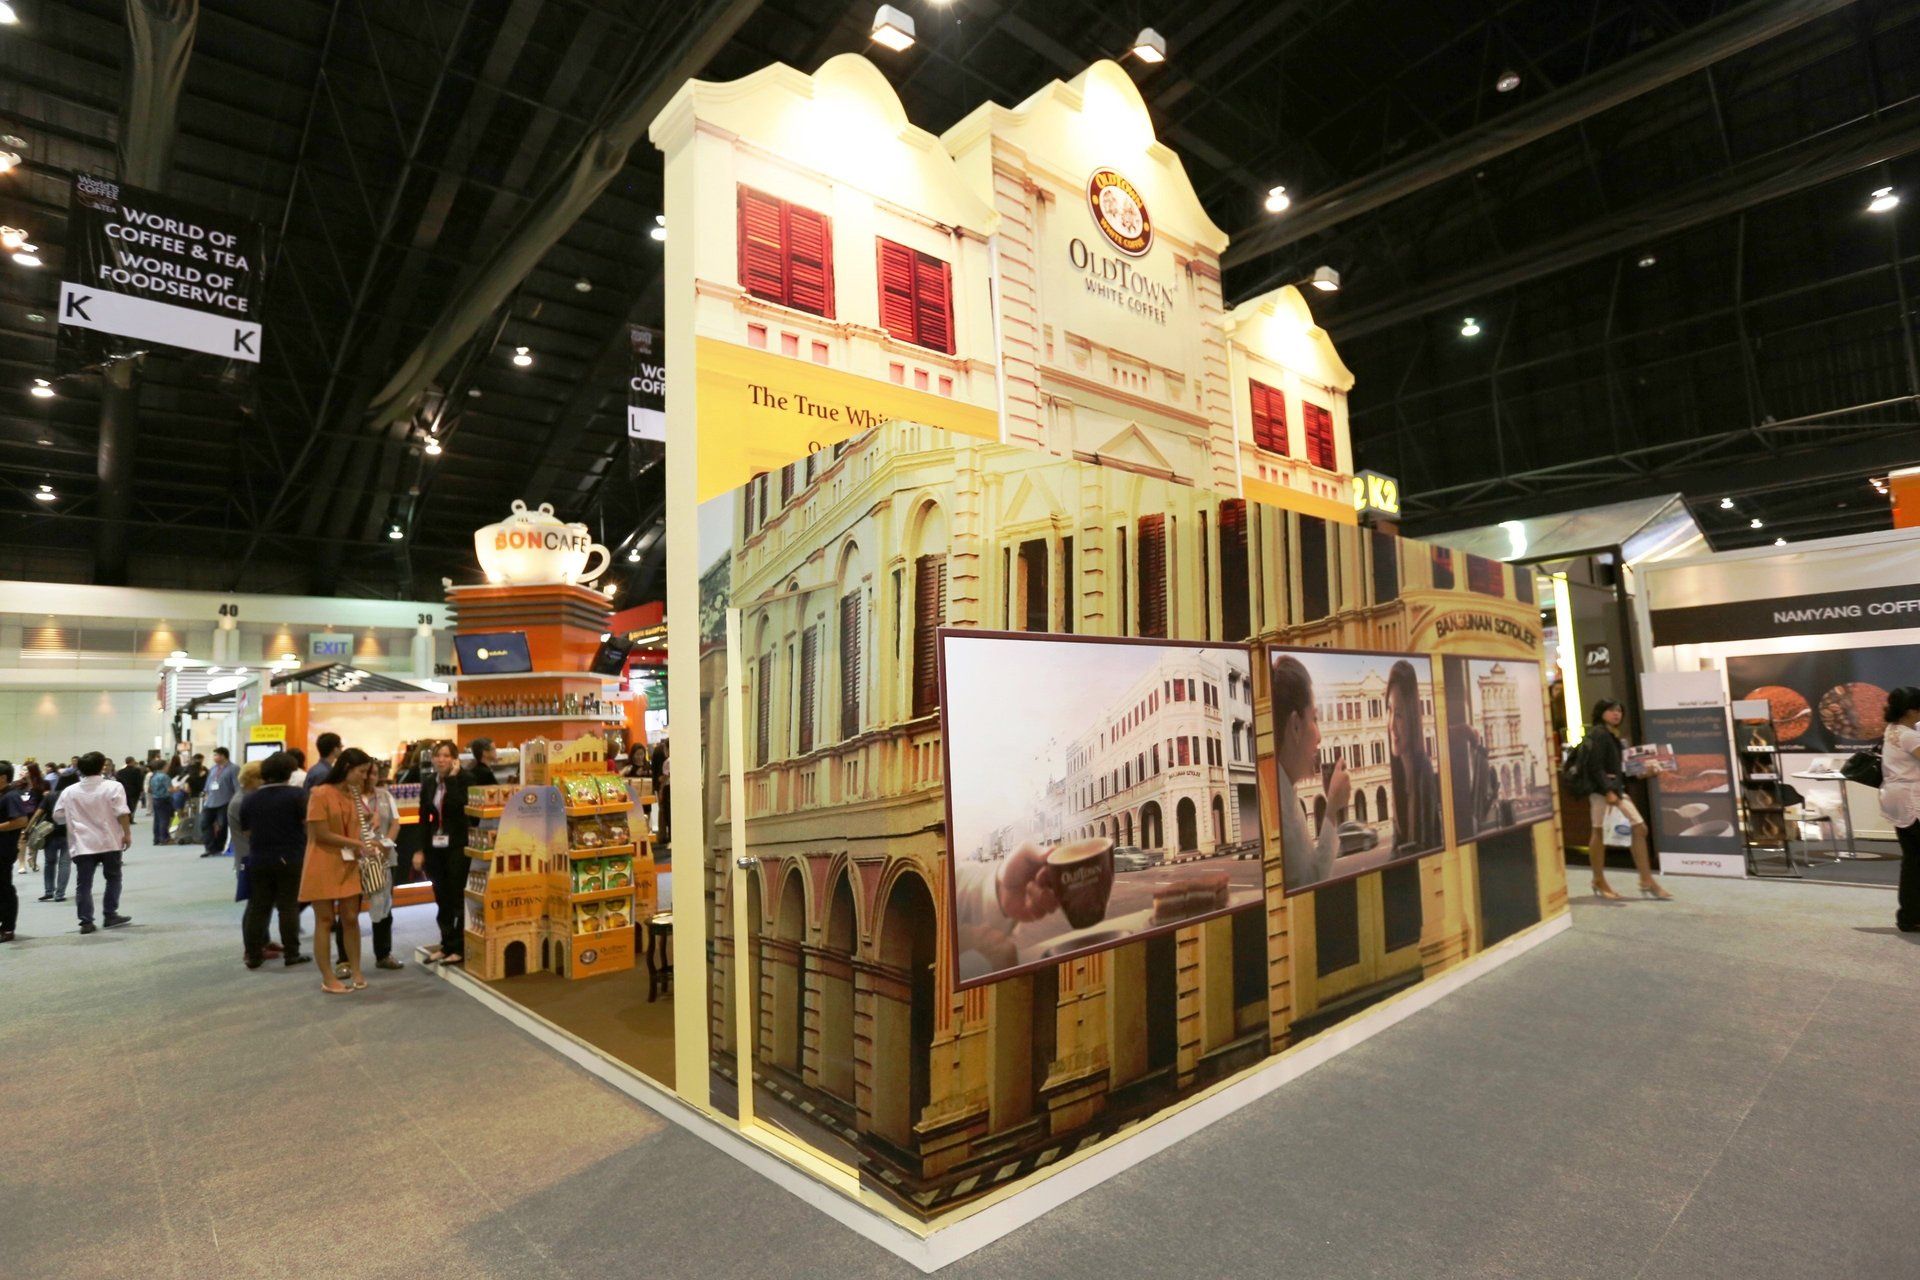 Oldtown Coffee @ Thaifex 2014. Booth designed and built by Essential Global Fairs.